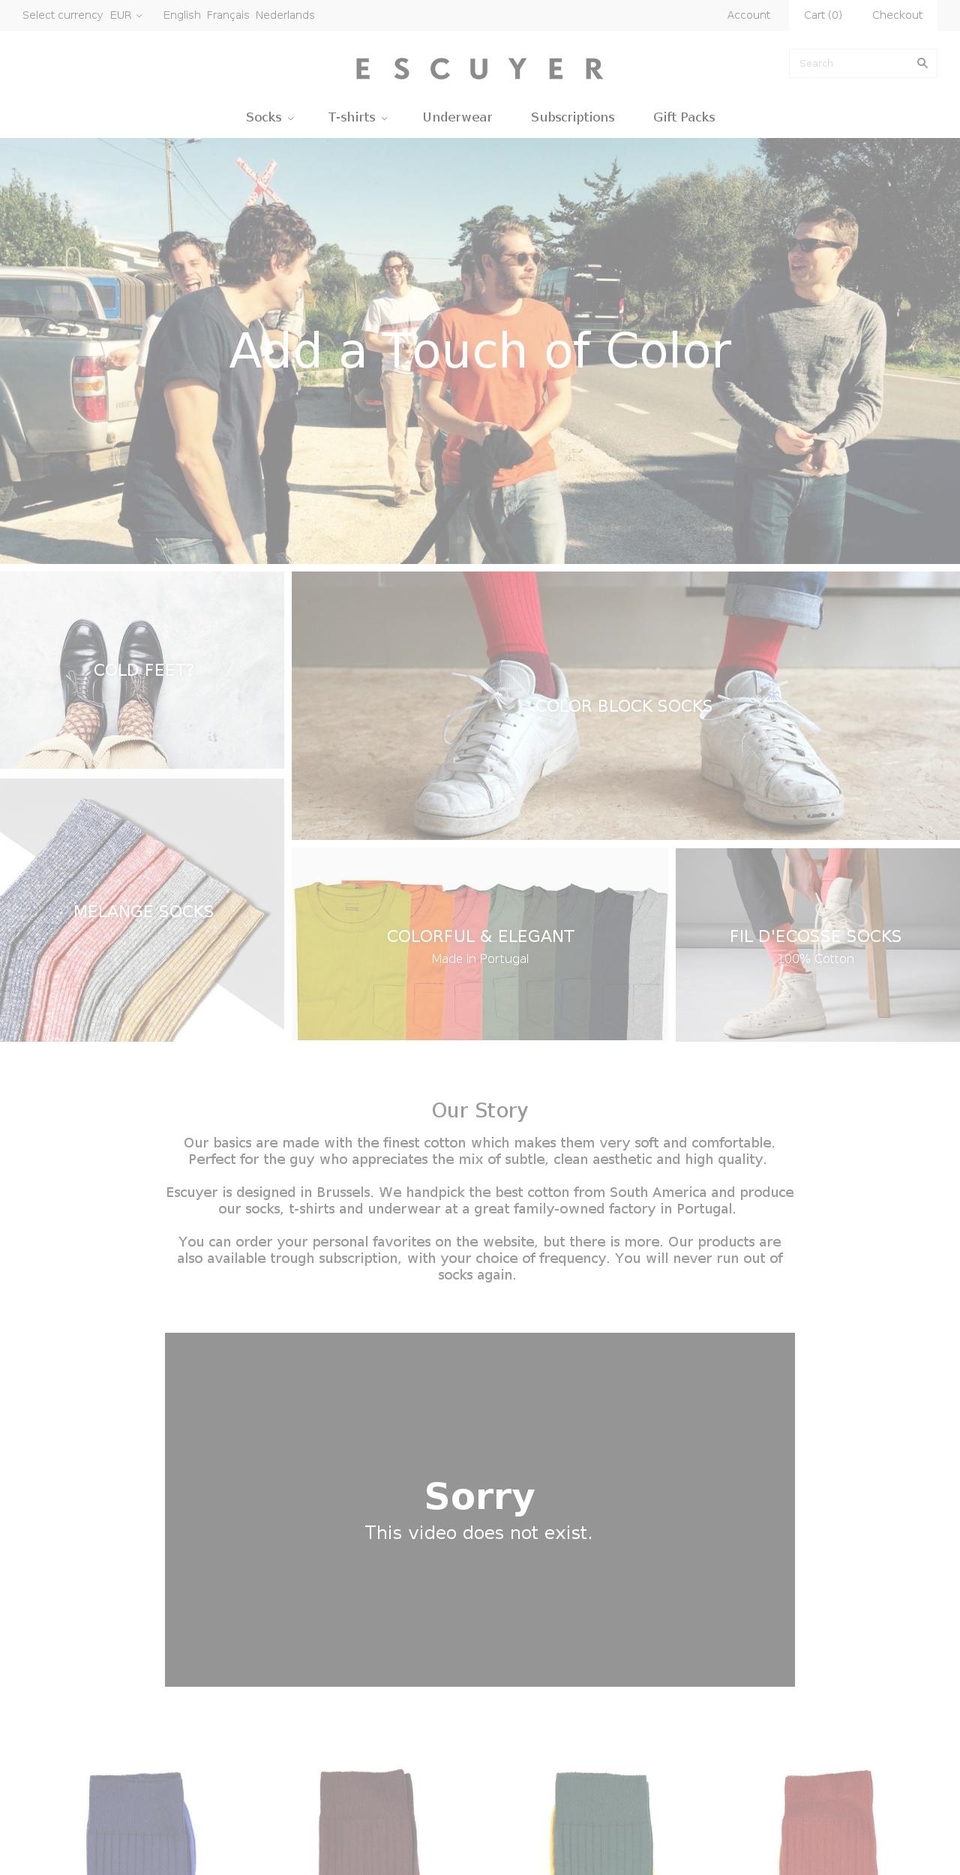 Grid Shopify theme site example escuyer.com